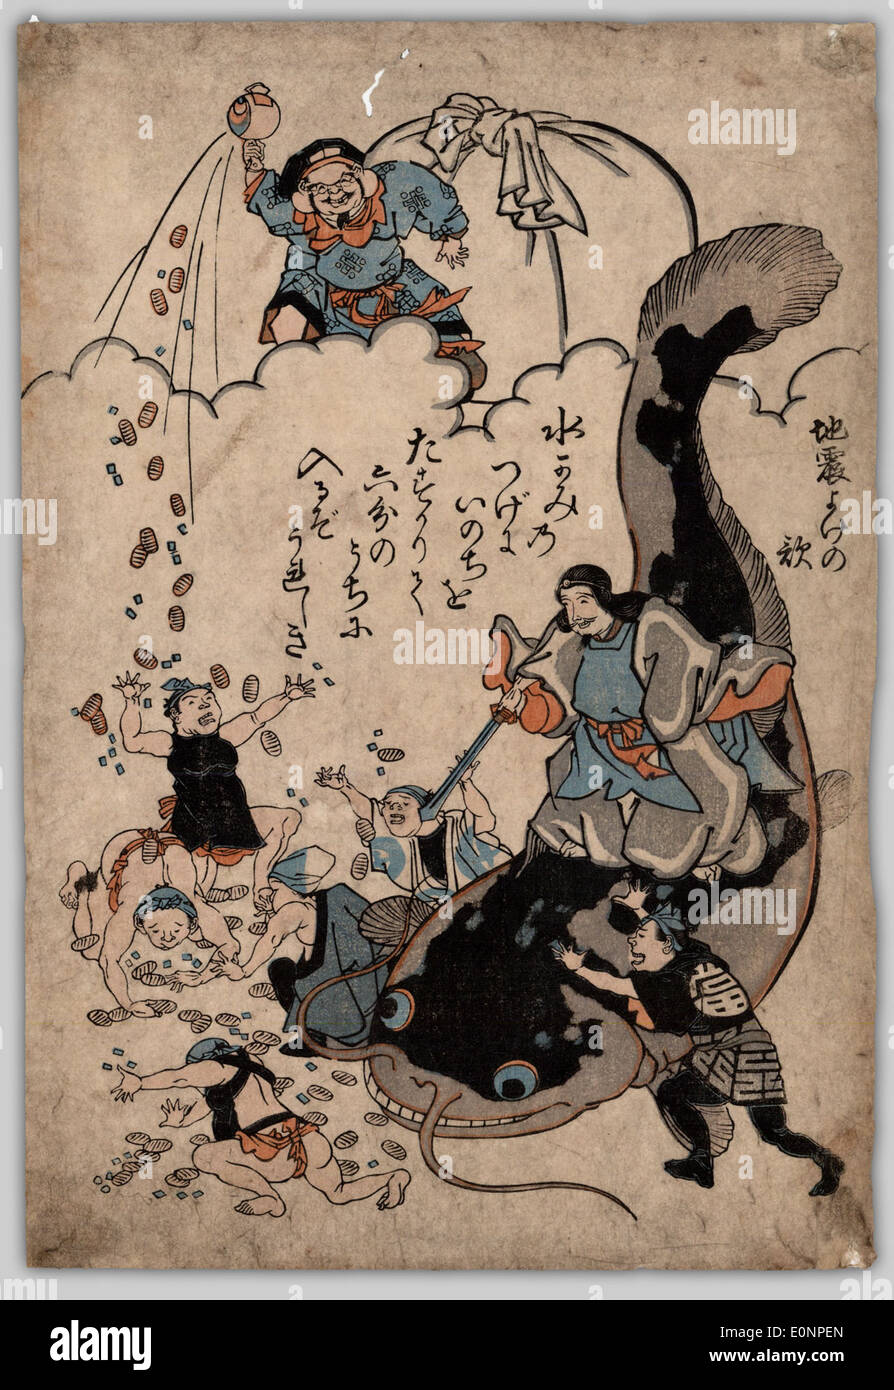 [Daikokuten, a god of wealth, throws money to people below while Namazu, a giant catfish, is held down by Kashima/Takemikazuch, a god of thunder and swords] Stock Photo